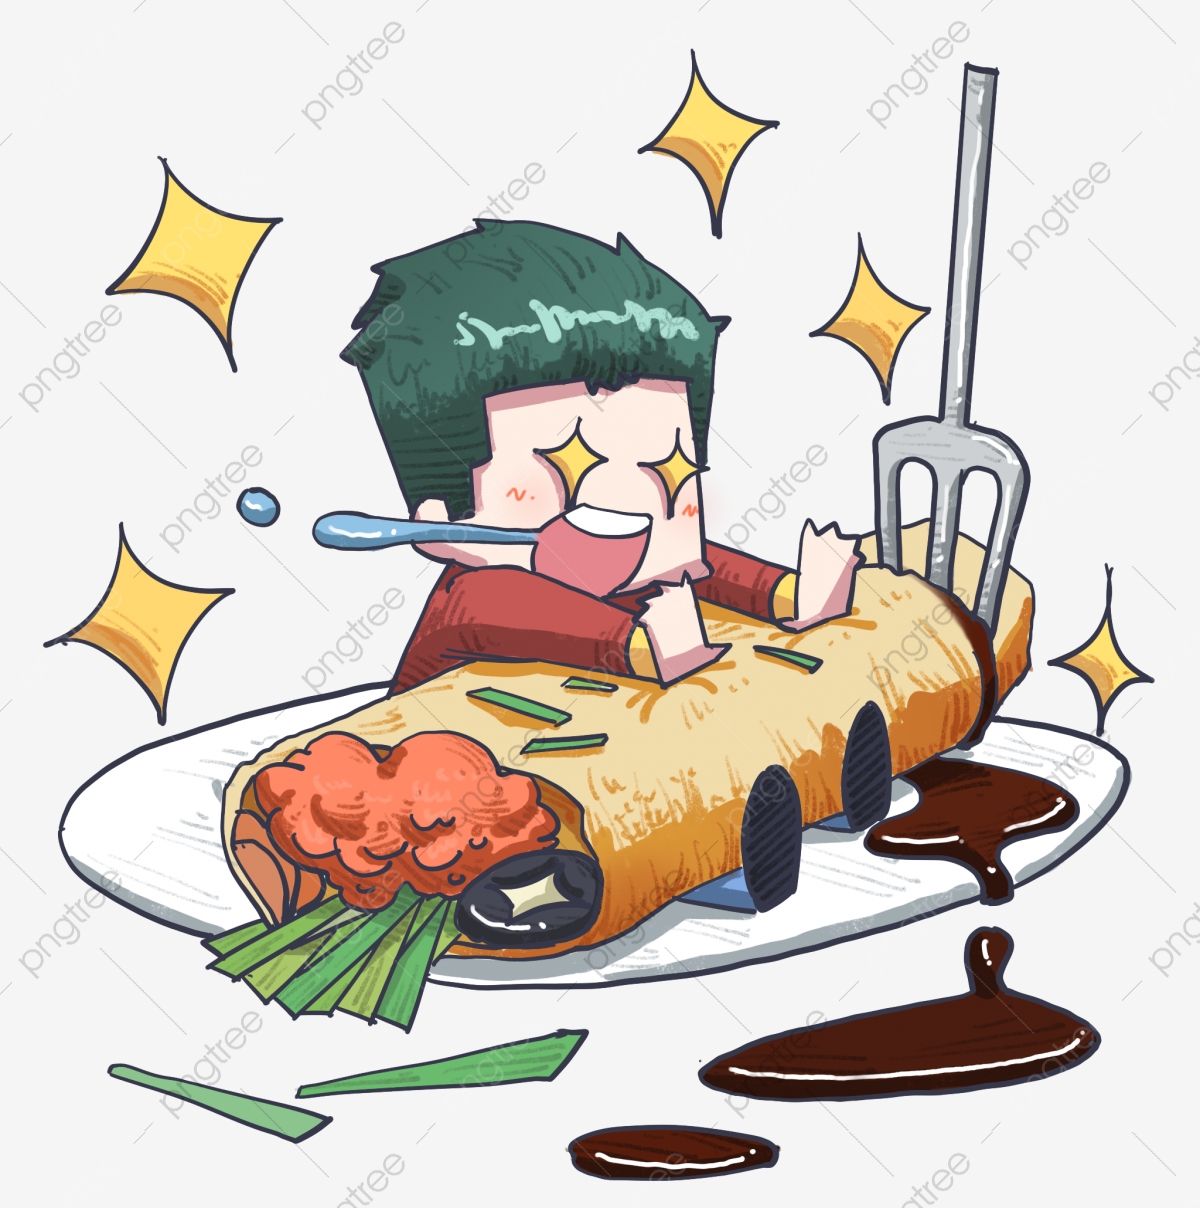 eating clipart delicious